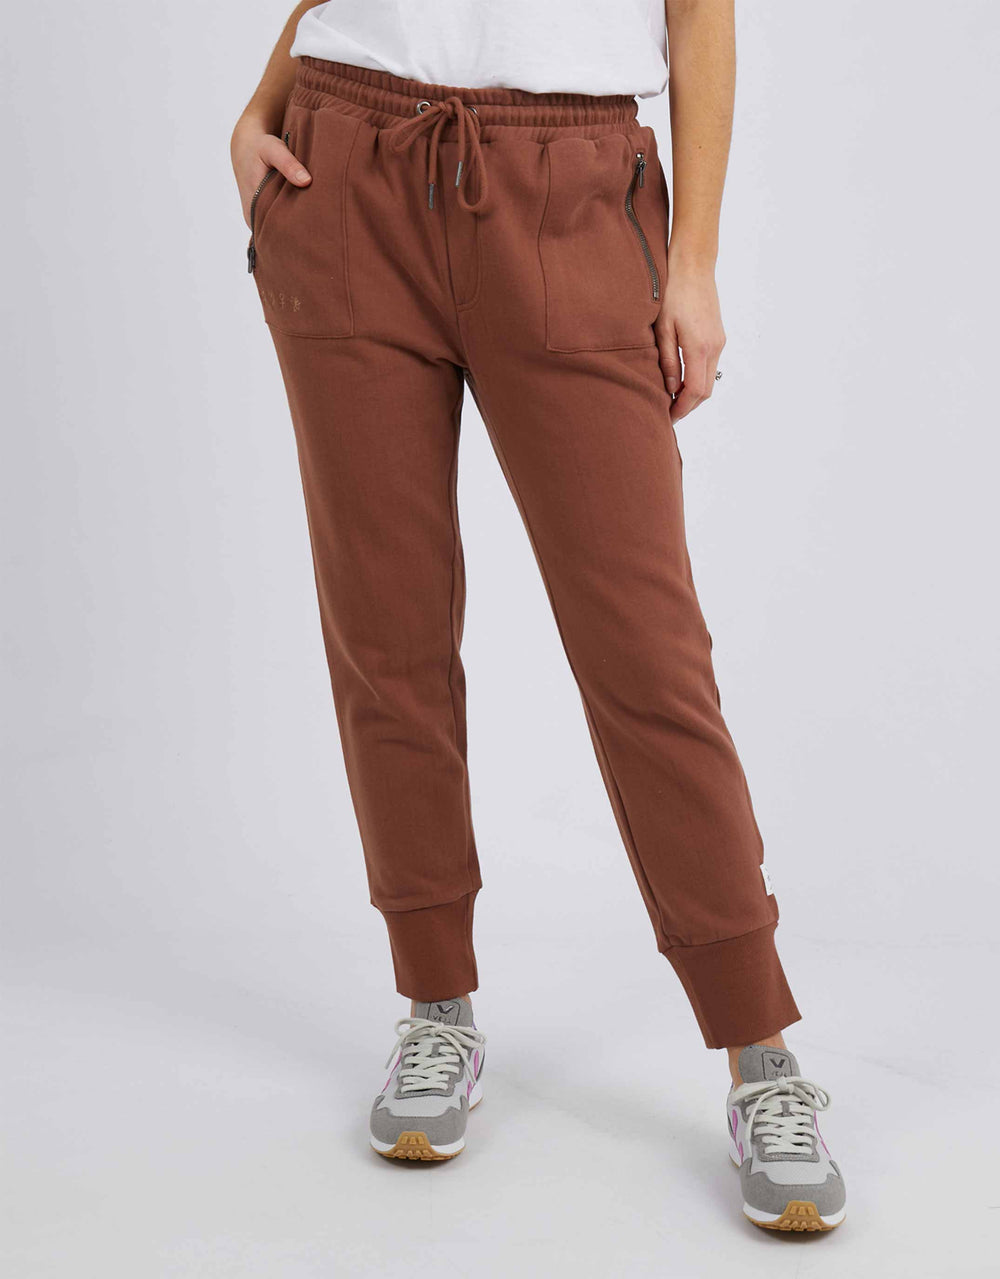 Rusty Greville Mens Track Pants